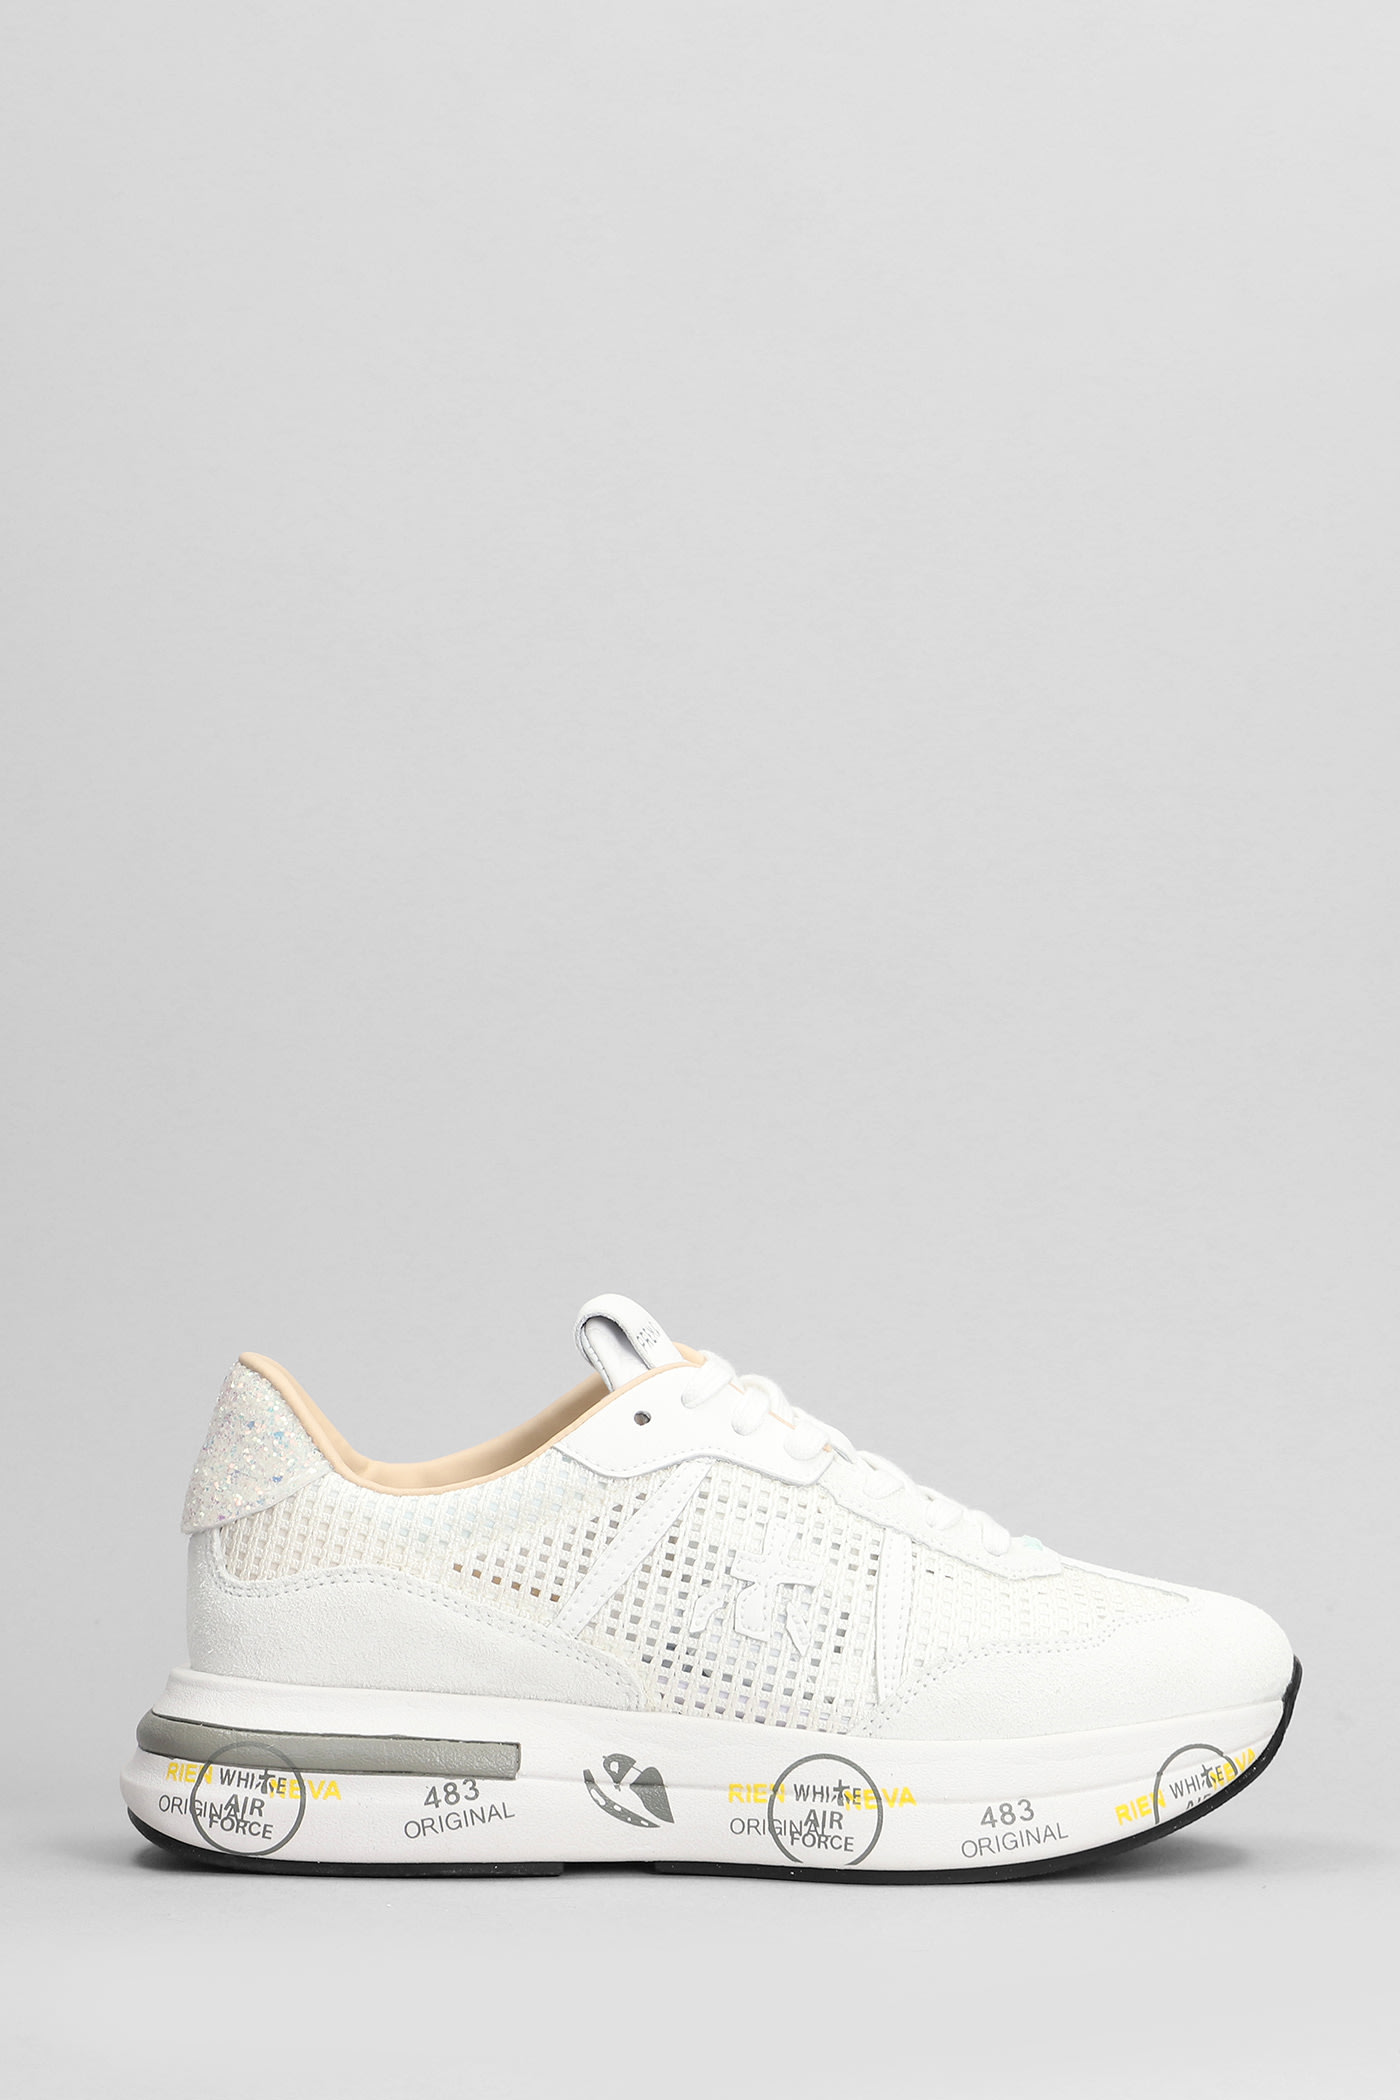 Premiata Cassie Sneakers In White Suede And Fabric